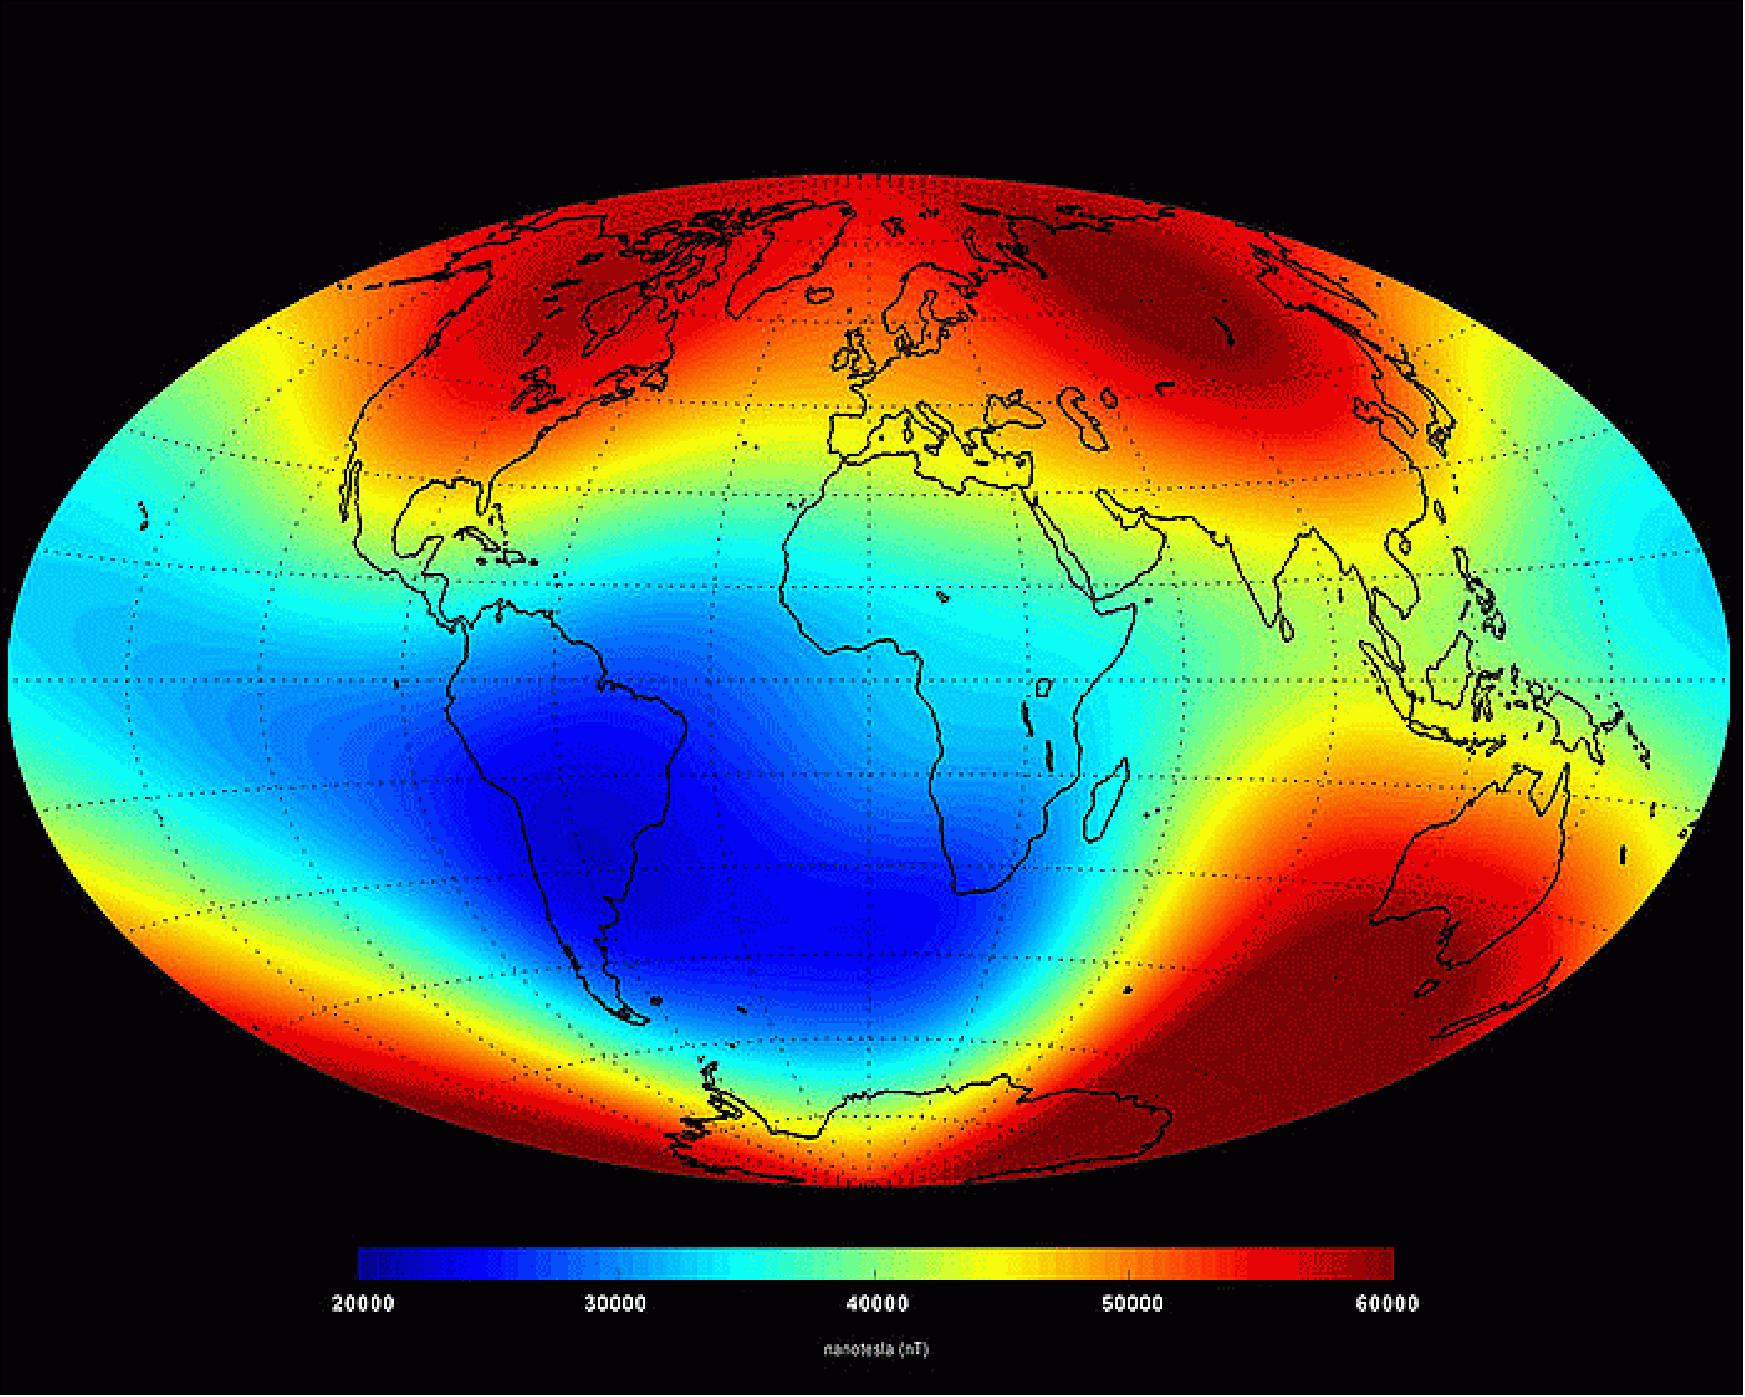 Figure 108: Earth's magnetic field in June 2014 as observed by the Swarm constellation, released on June 19, 2014 (Image credit: ESA/DTU Space, Ref. 126)